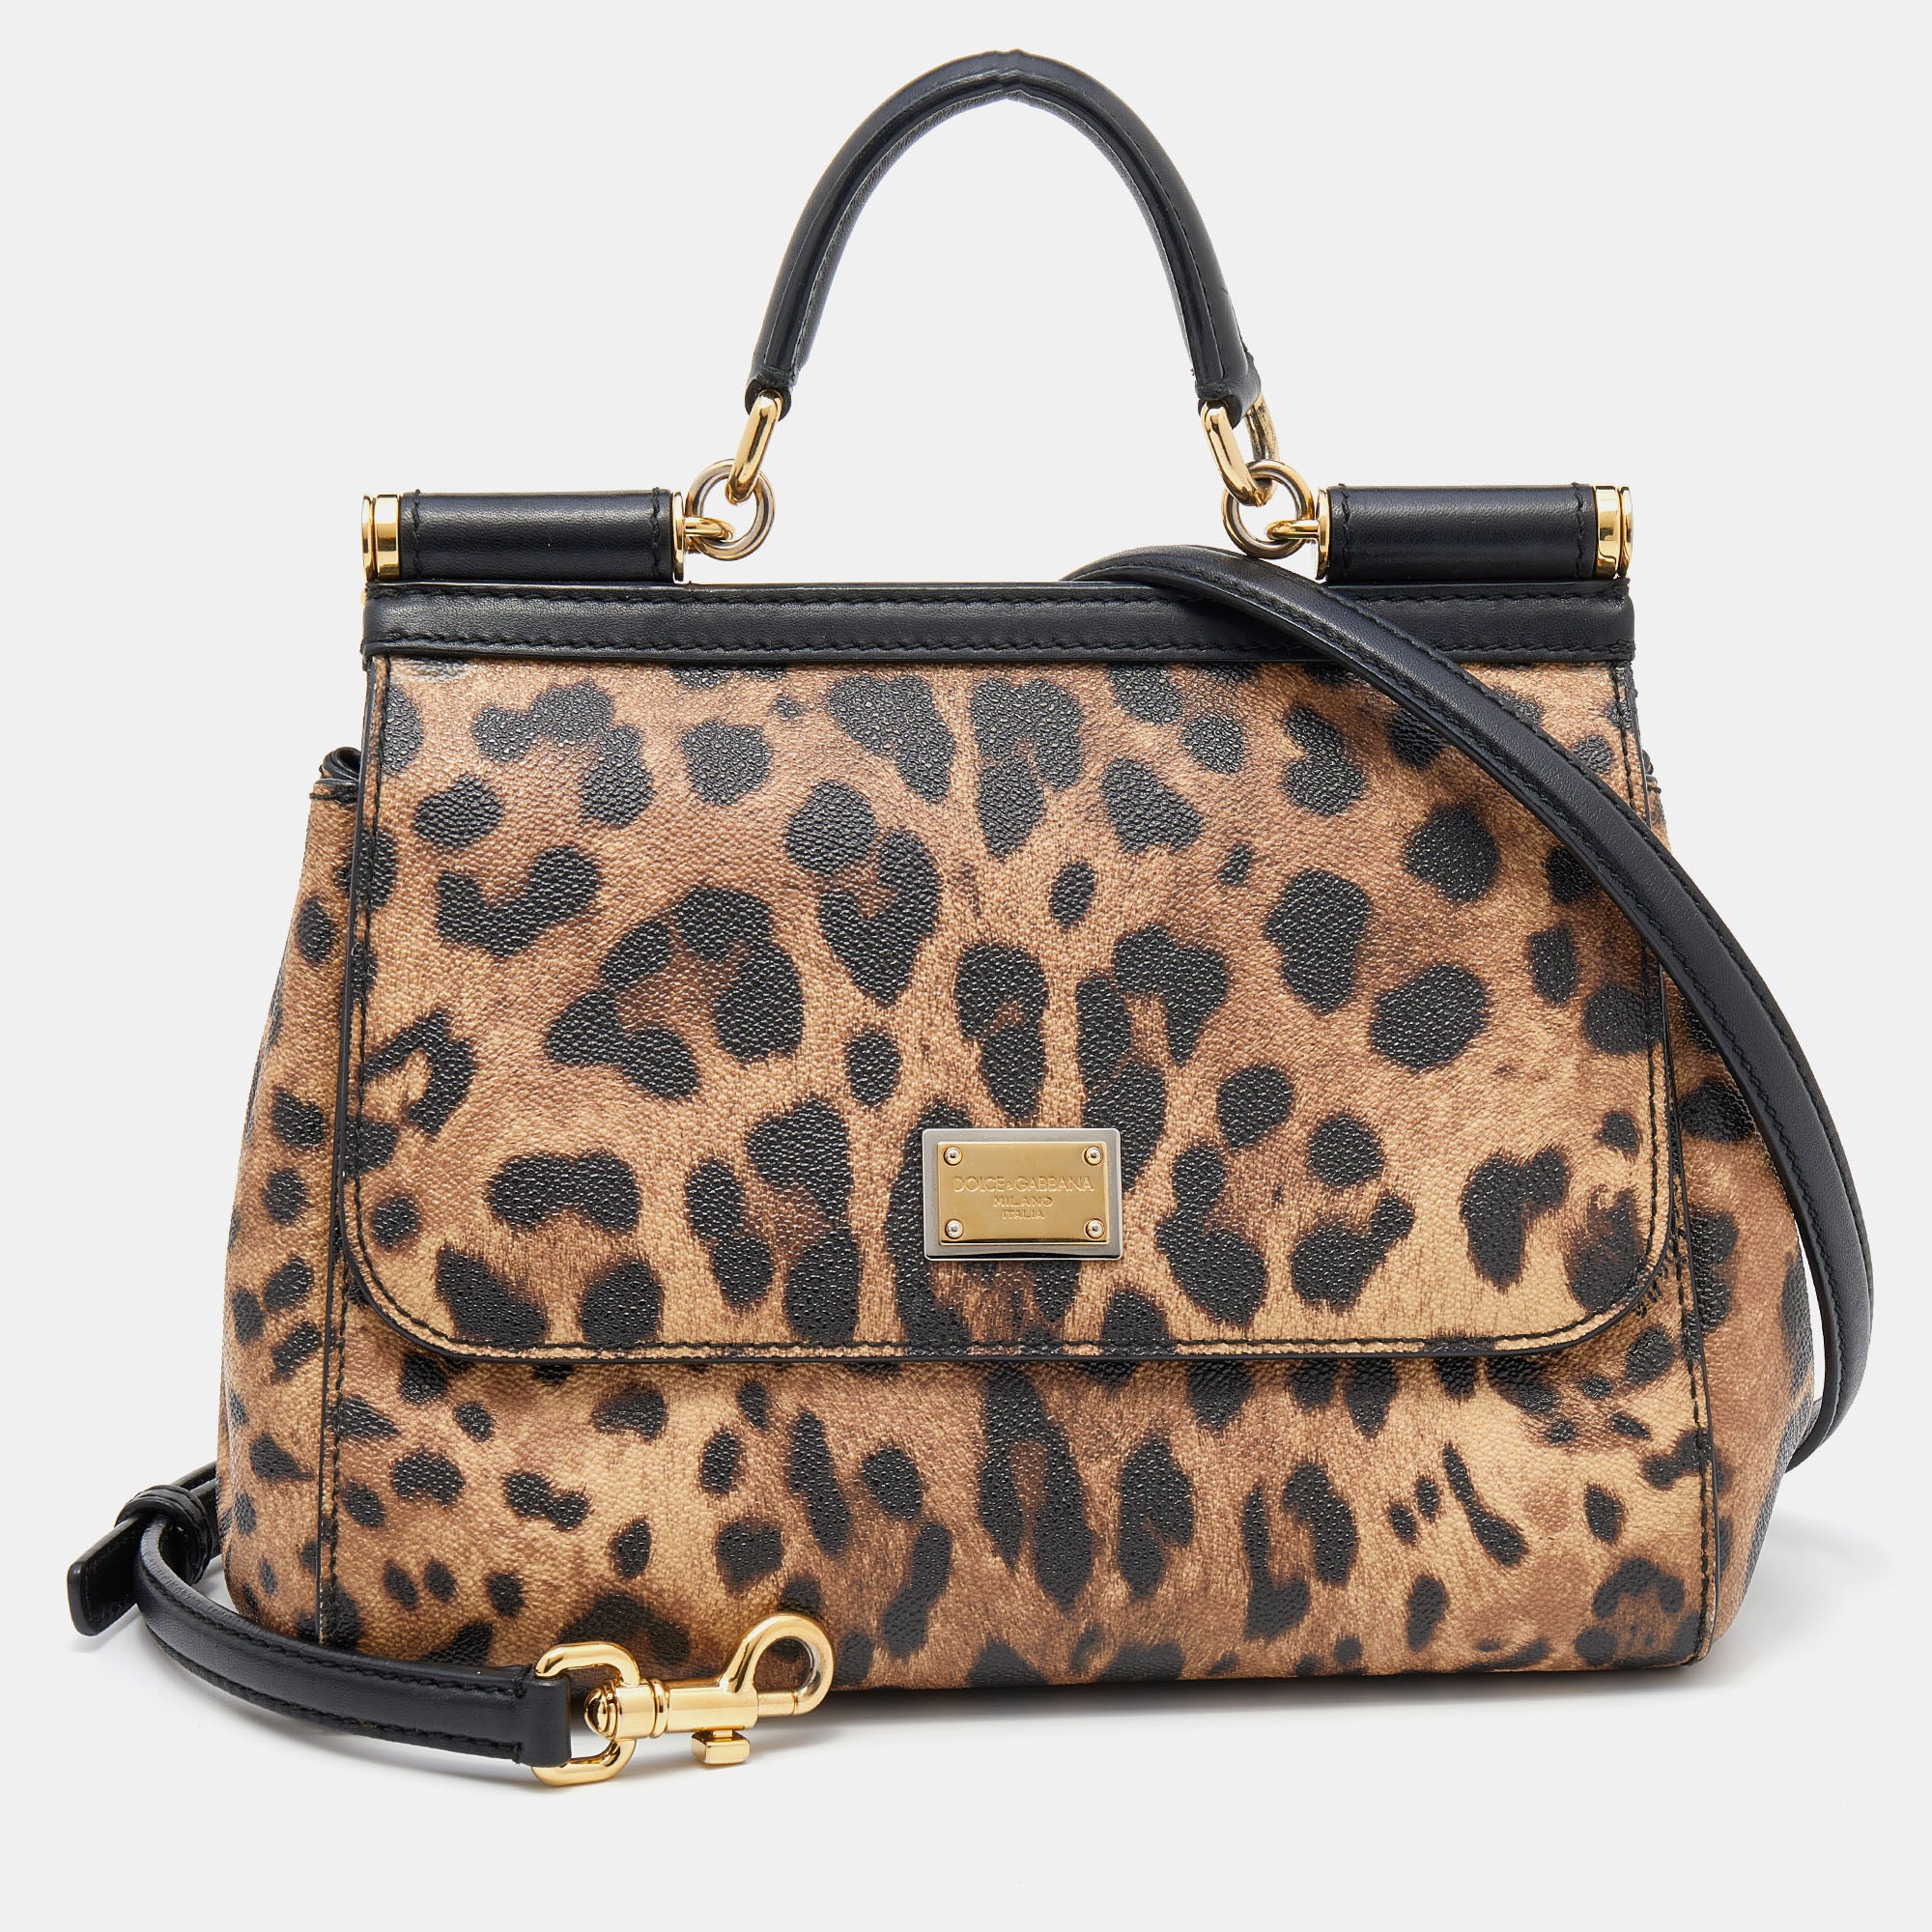 Dolce & Gabbana Black/Beige Leopard Print Coated Canvas And Leather Me